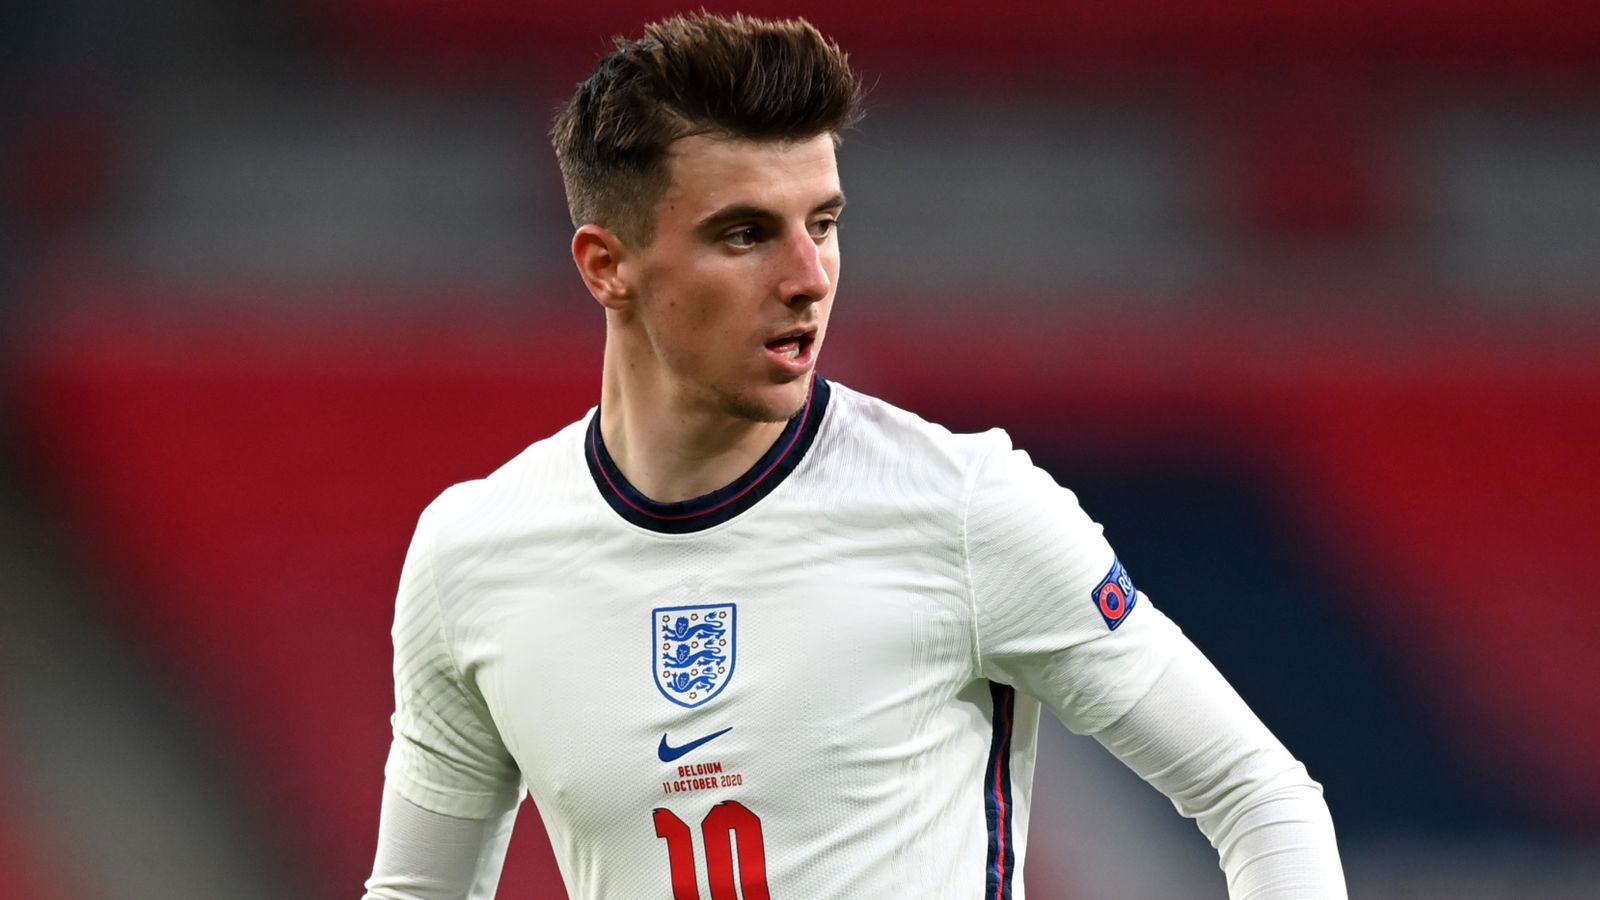 Mason Mount: Jack Grealish and I connect, we can play together for England  | Football News | Sky Sports